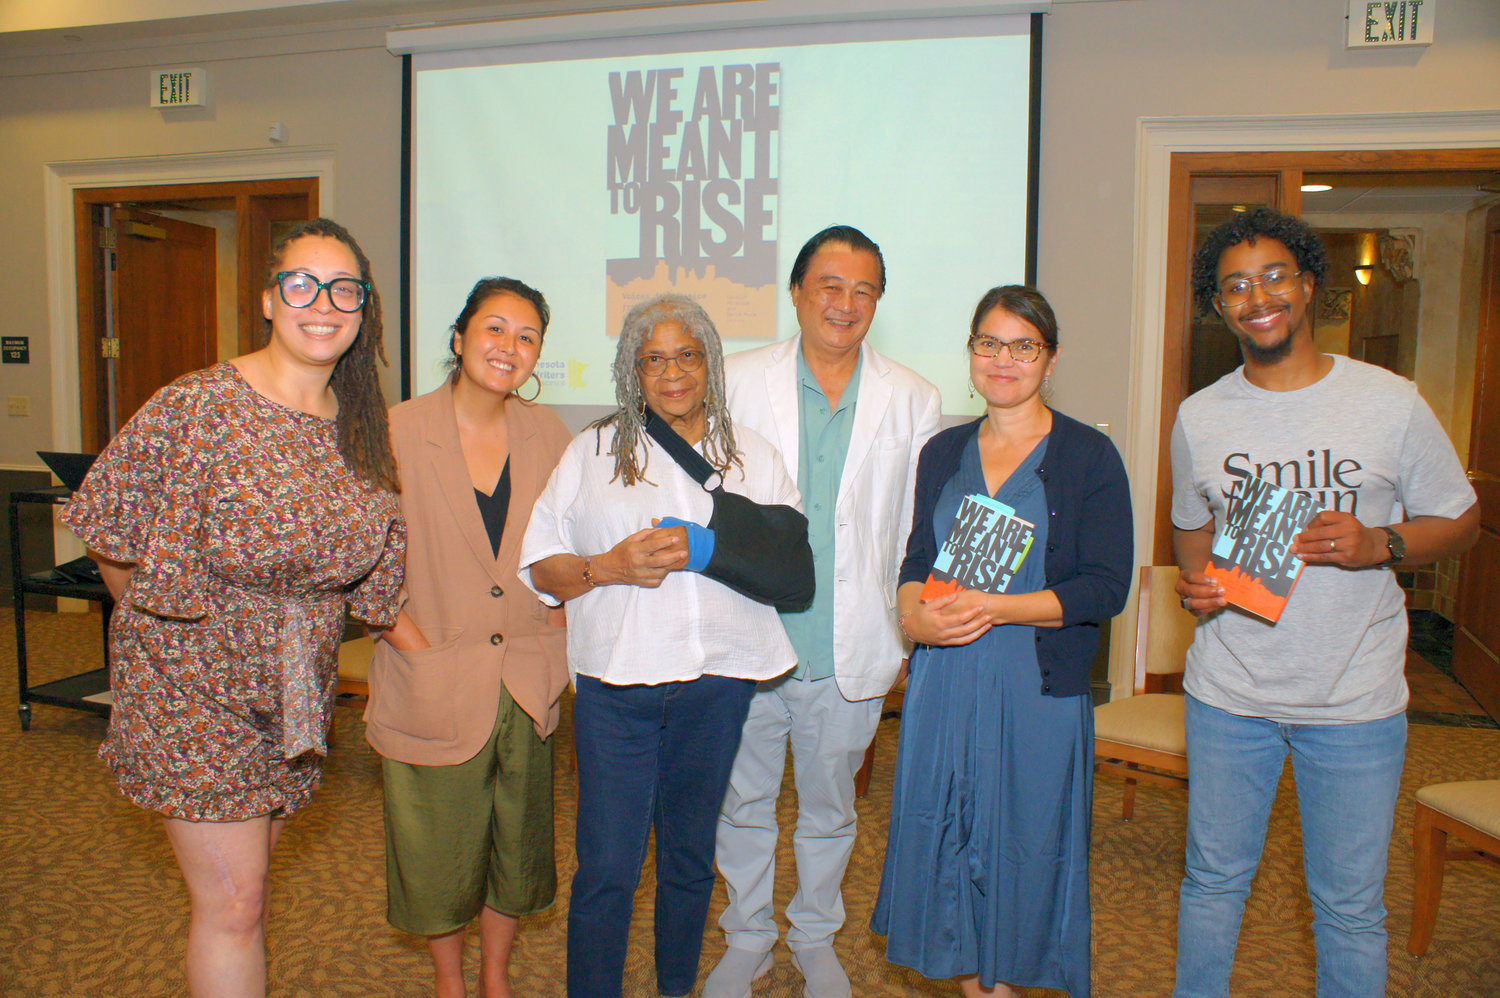 Writers and editors celebrate the launch of “We Are Meant To Rise: Voices of Justice from Minneapolis to the World.” Left to right: Tess Montgomery, Samantha Sencer-Mura, Carolyn Holbrook, David Mura, Anika Fajardo, and Suleiman Adan. (Photo by Terry Faust)